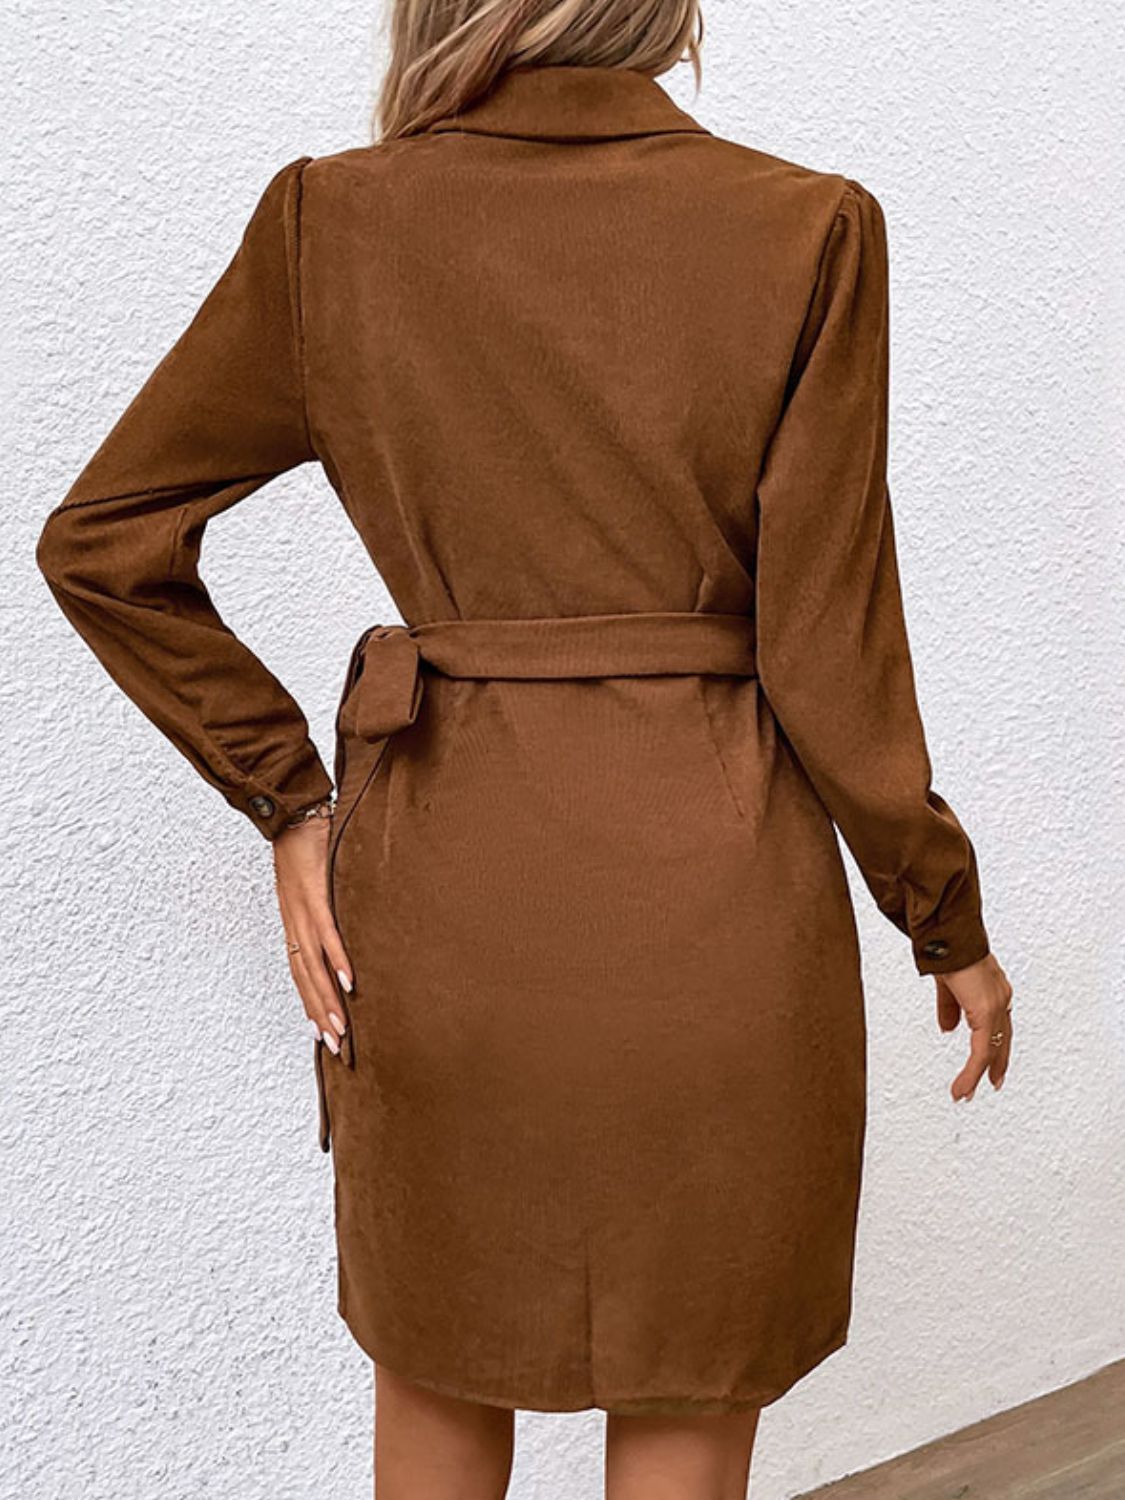 Button-Down Collared Neck Long Sleeve Side Tie Dress